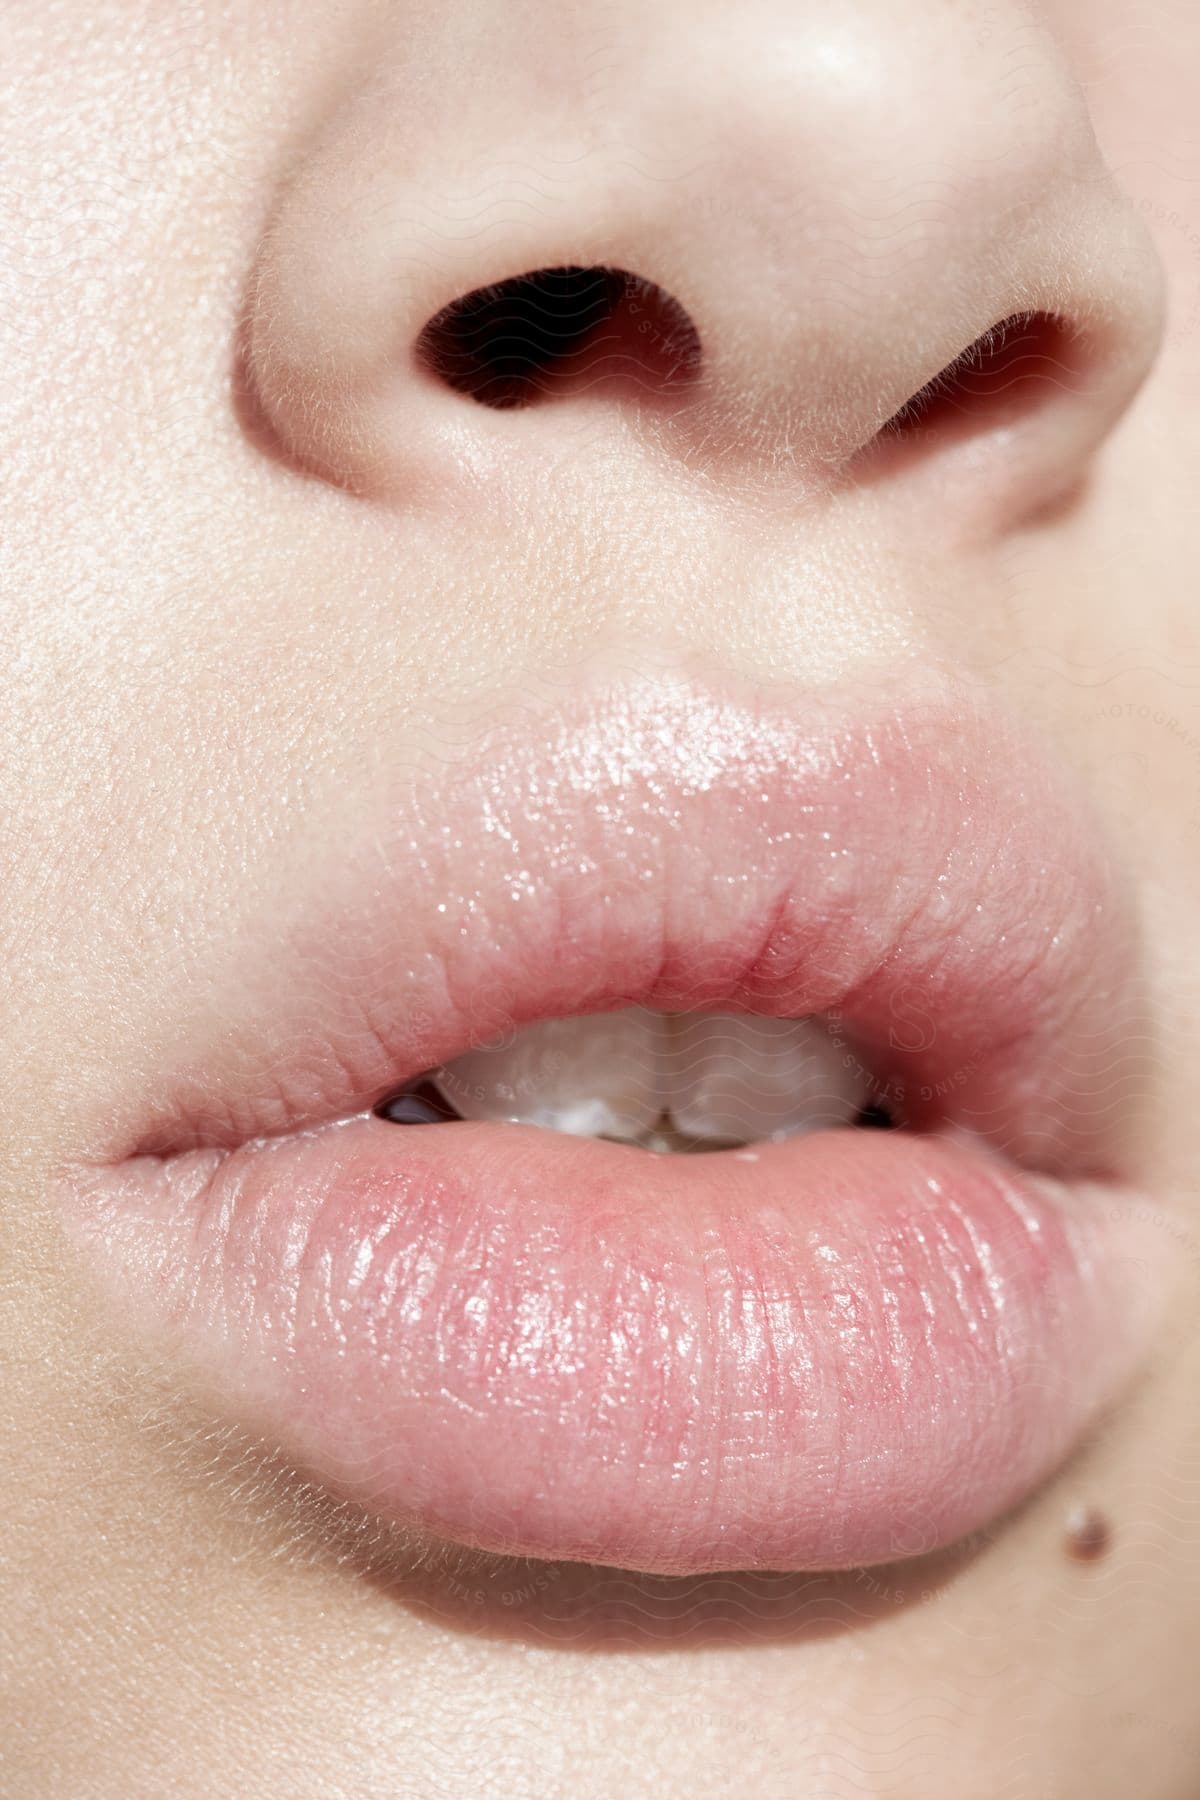 An ultra close up of a persons mouth and nose